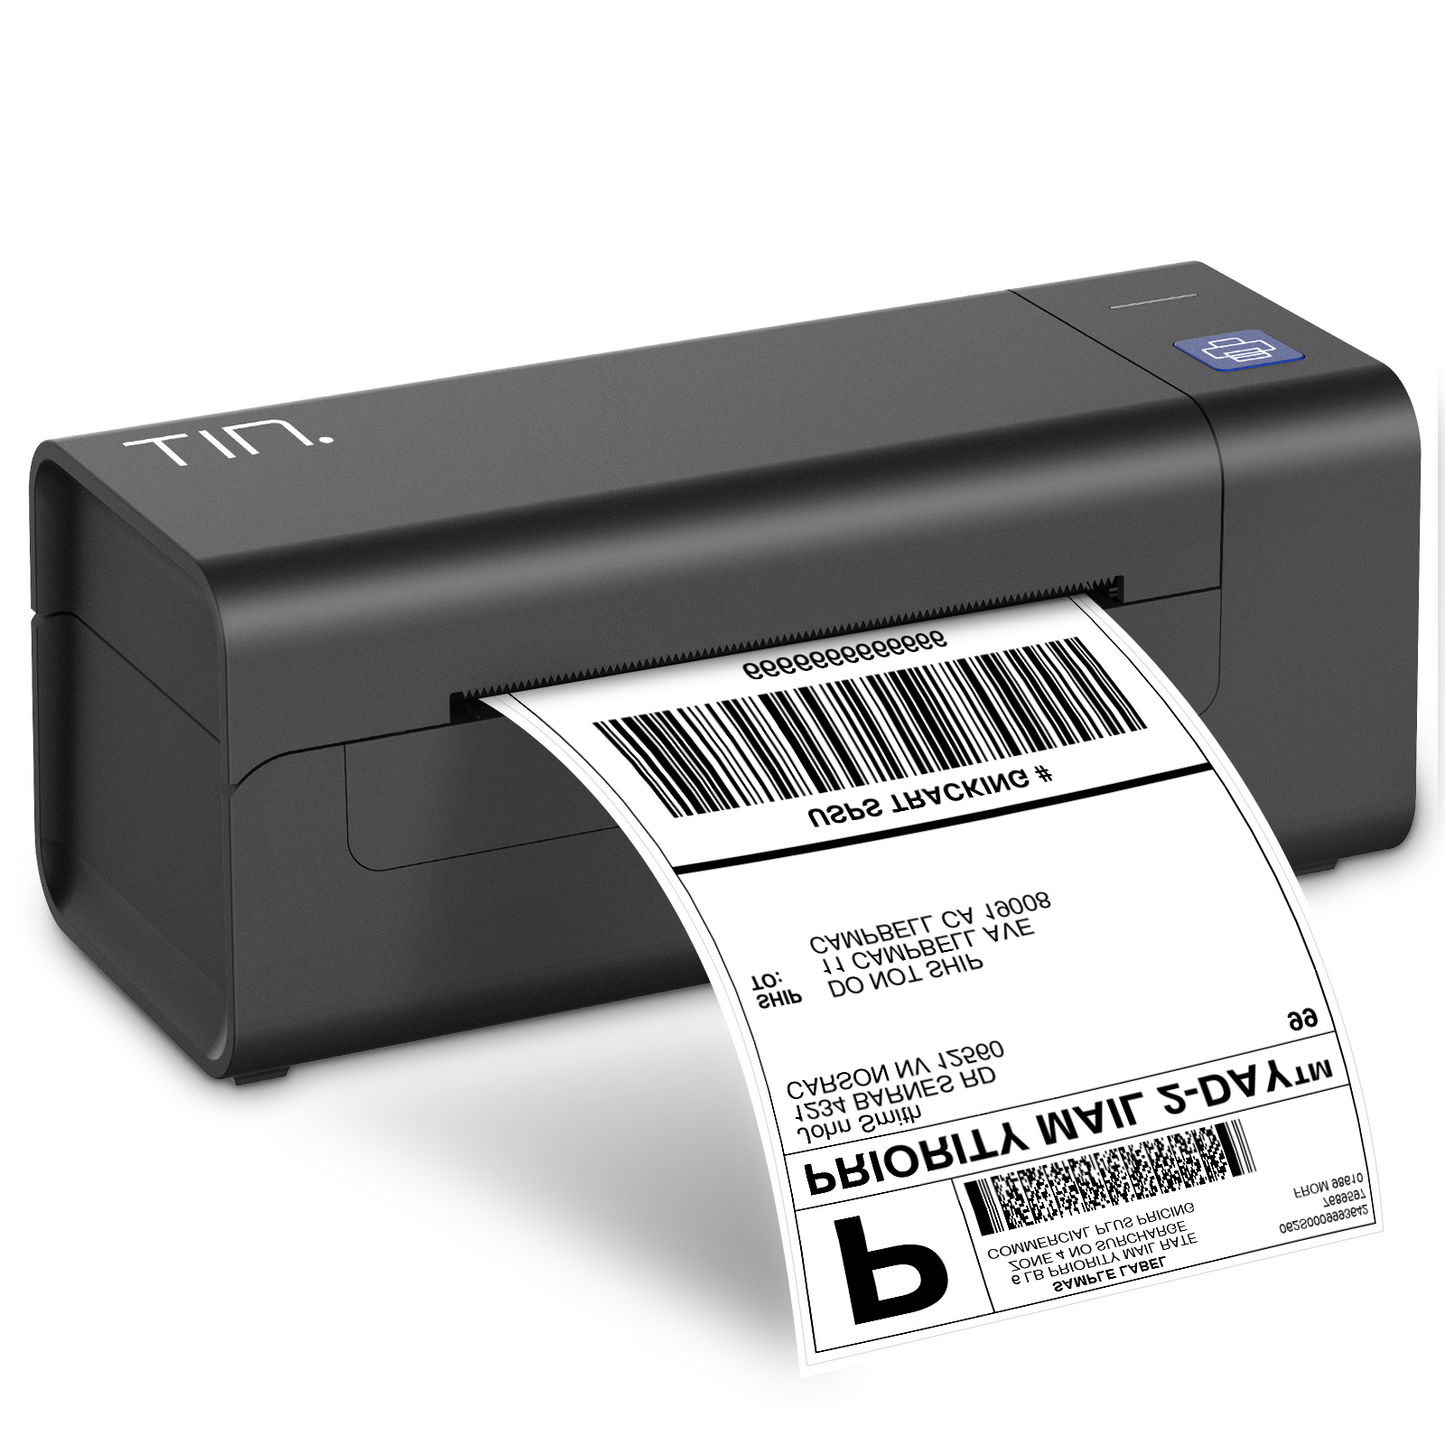 TIN Thermal Label Printer, Thermal Shipping Label Printer, 4x6 Label Maker for Small Business, Compatible with Amazon, Ebay, Shopify, FedEx, UPS, USB Label Printer Supports Windows, Mac, Chromebook